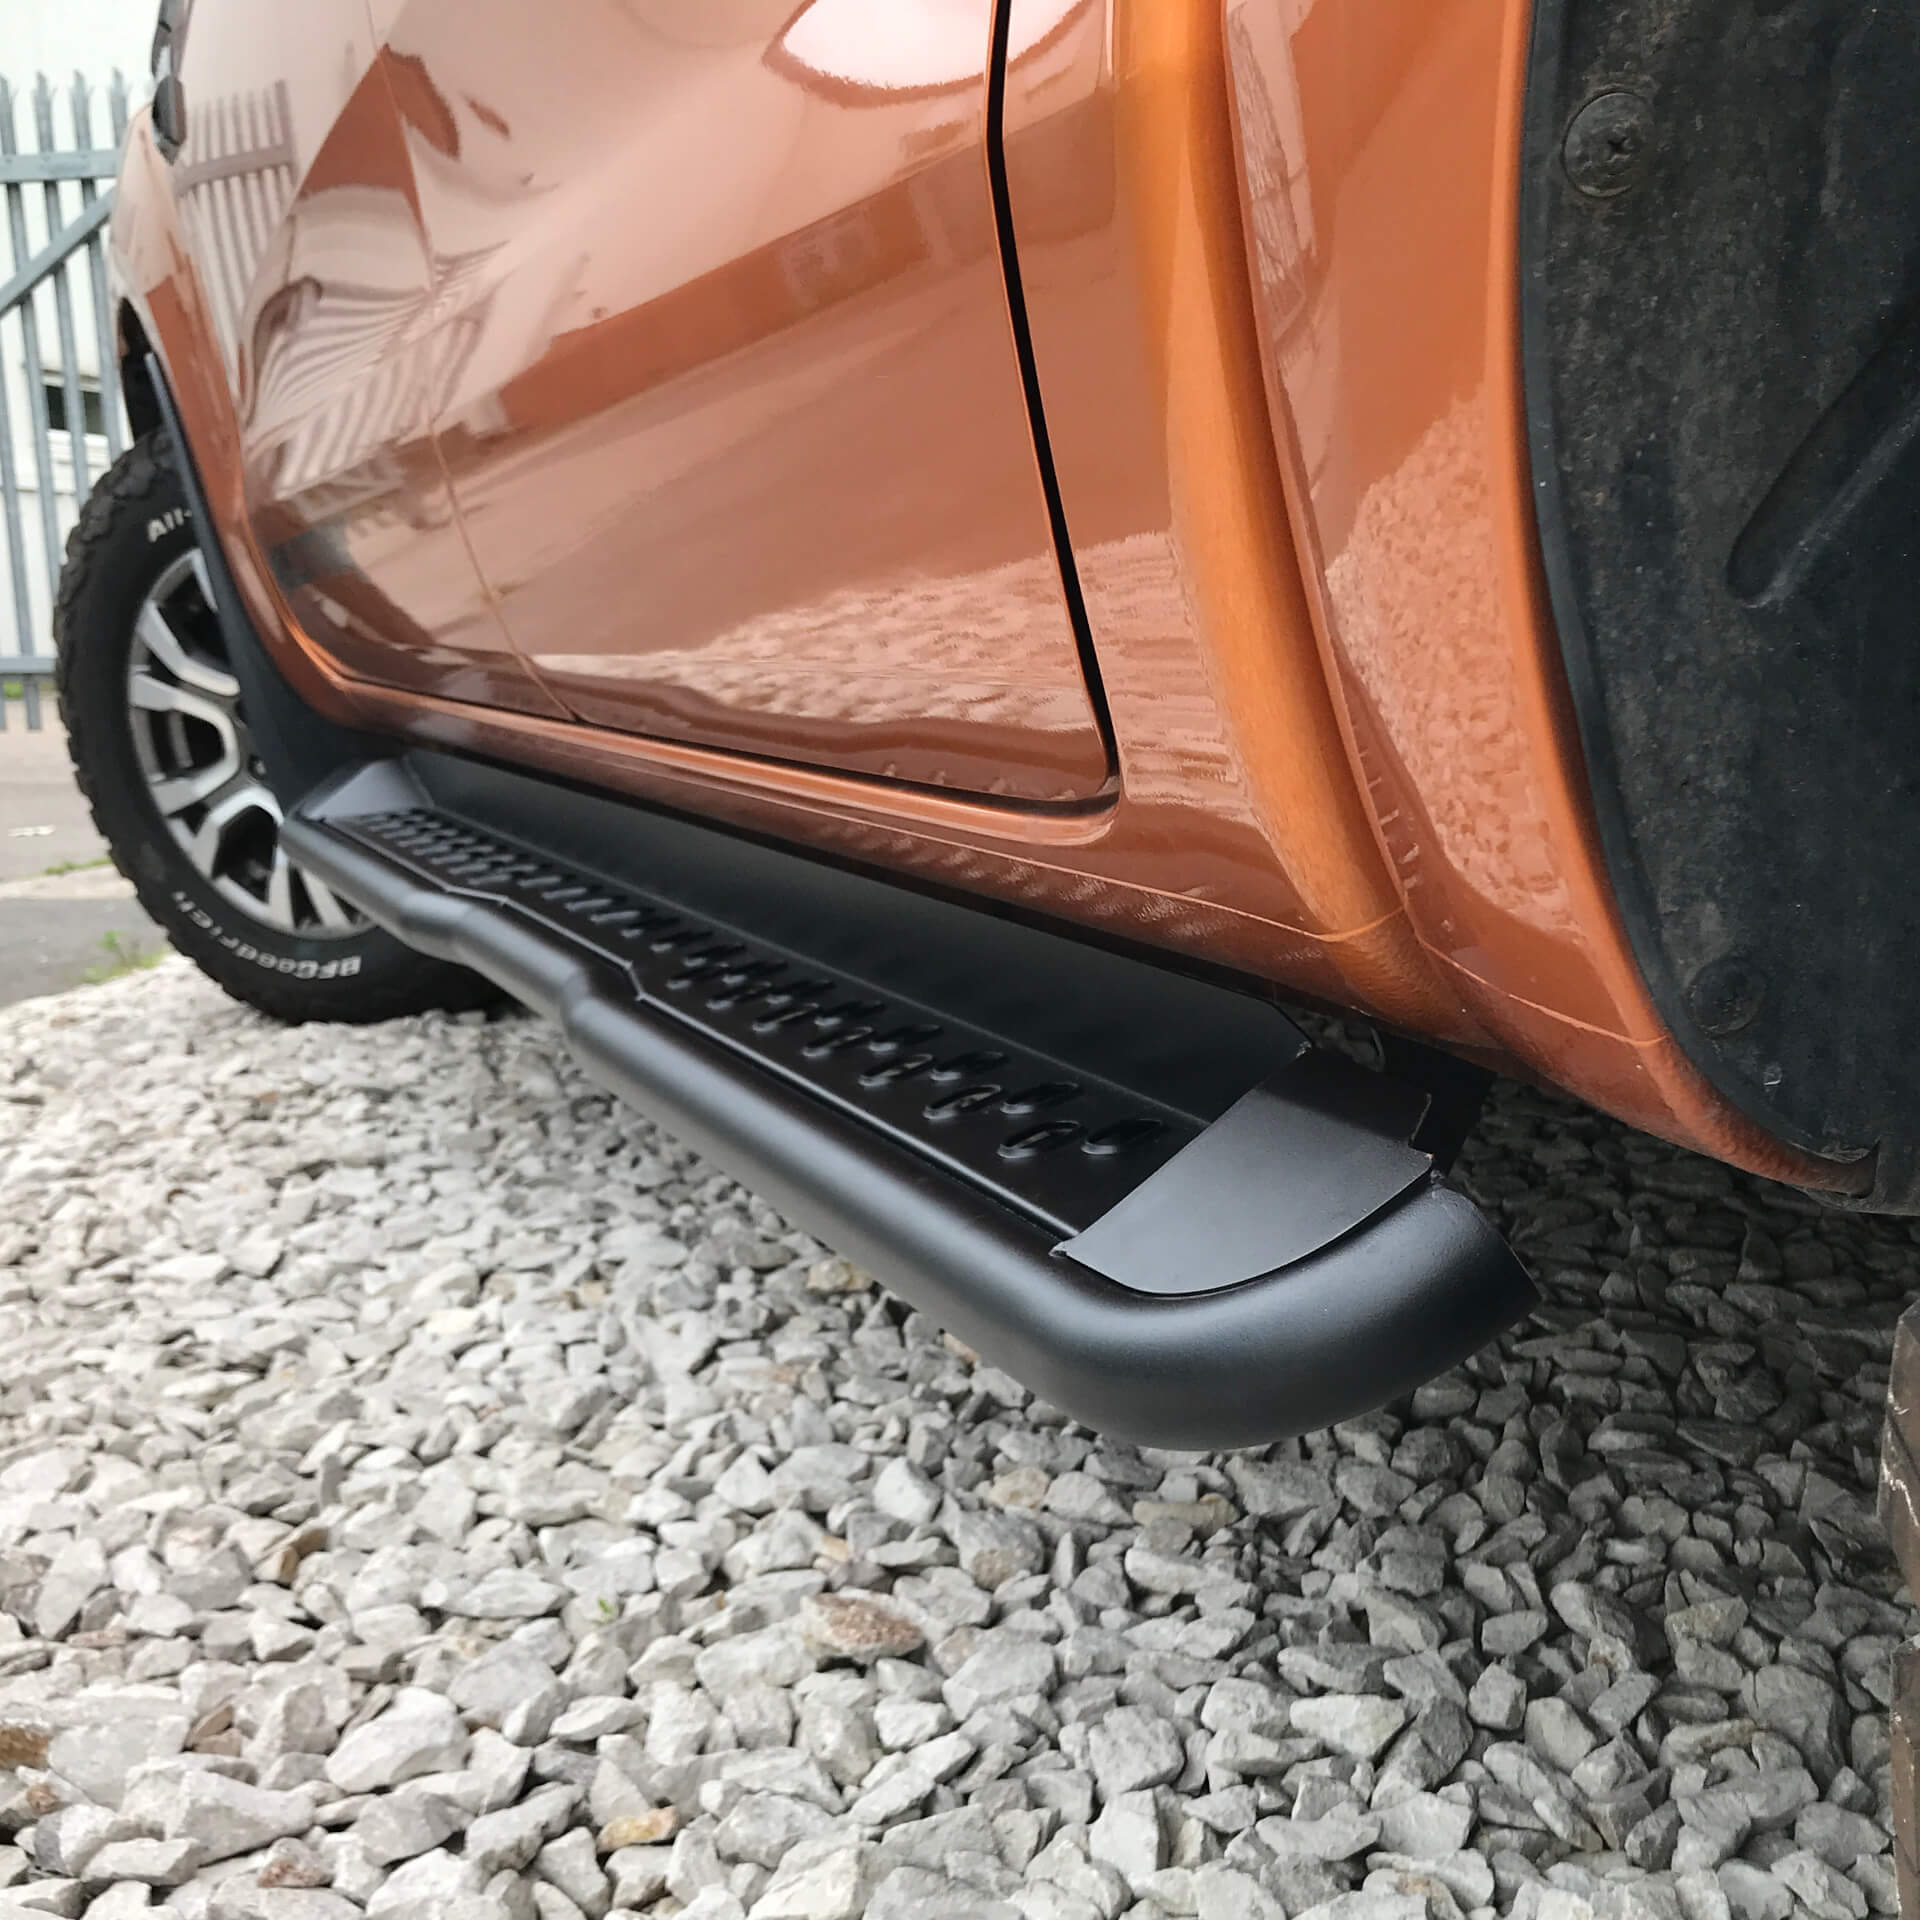 RockSlider Side Steps Running Boards for Nissan Navara NP300 Double Cab 2015+ -  - sold by Direct4x4